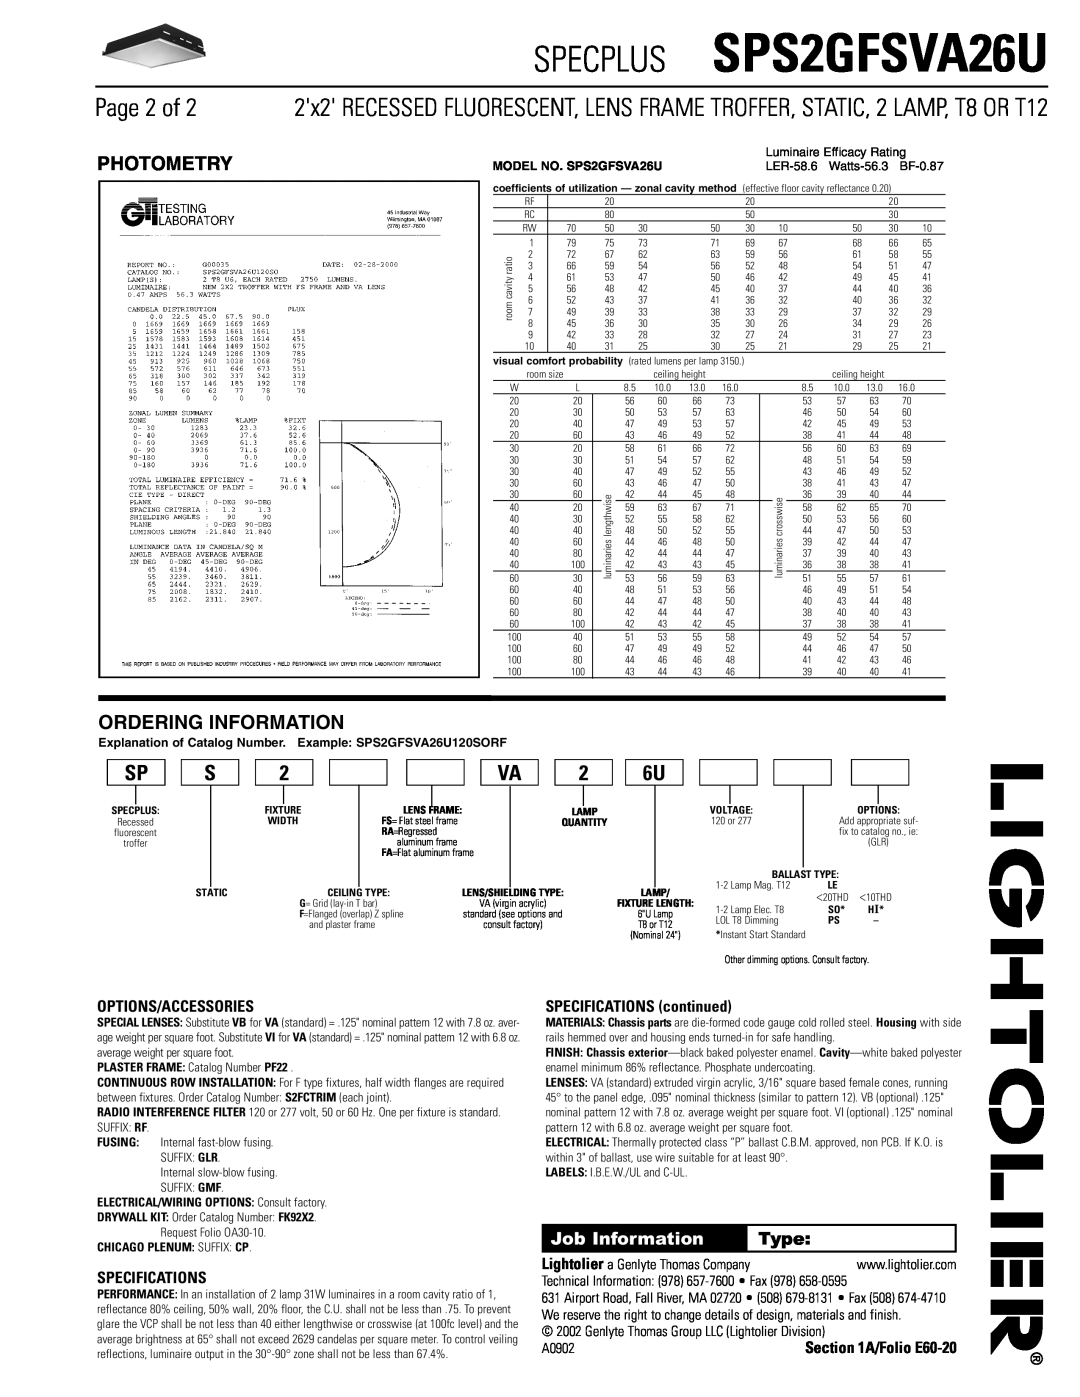 Lightolier SPS2GFSVA26U Page 2 of, Photometry, Ordering Information, Options/Accessories, Specifications, Job Information 